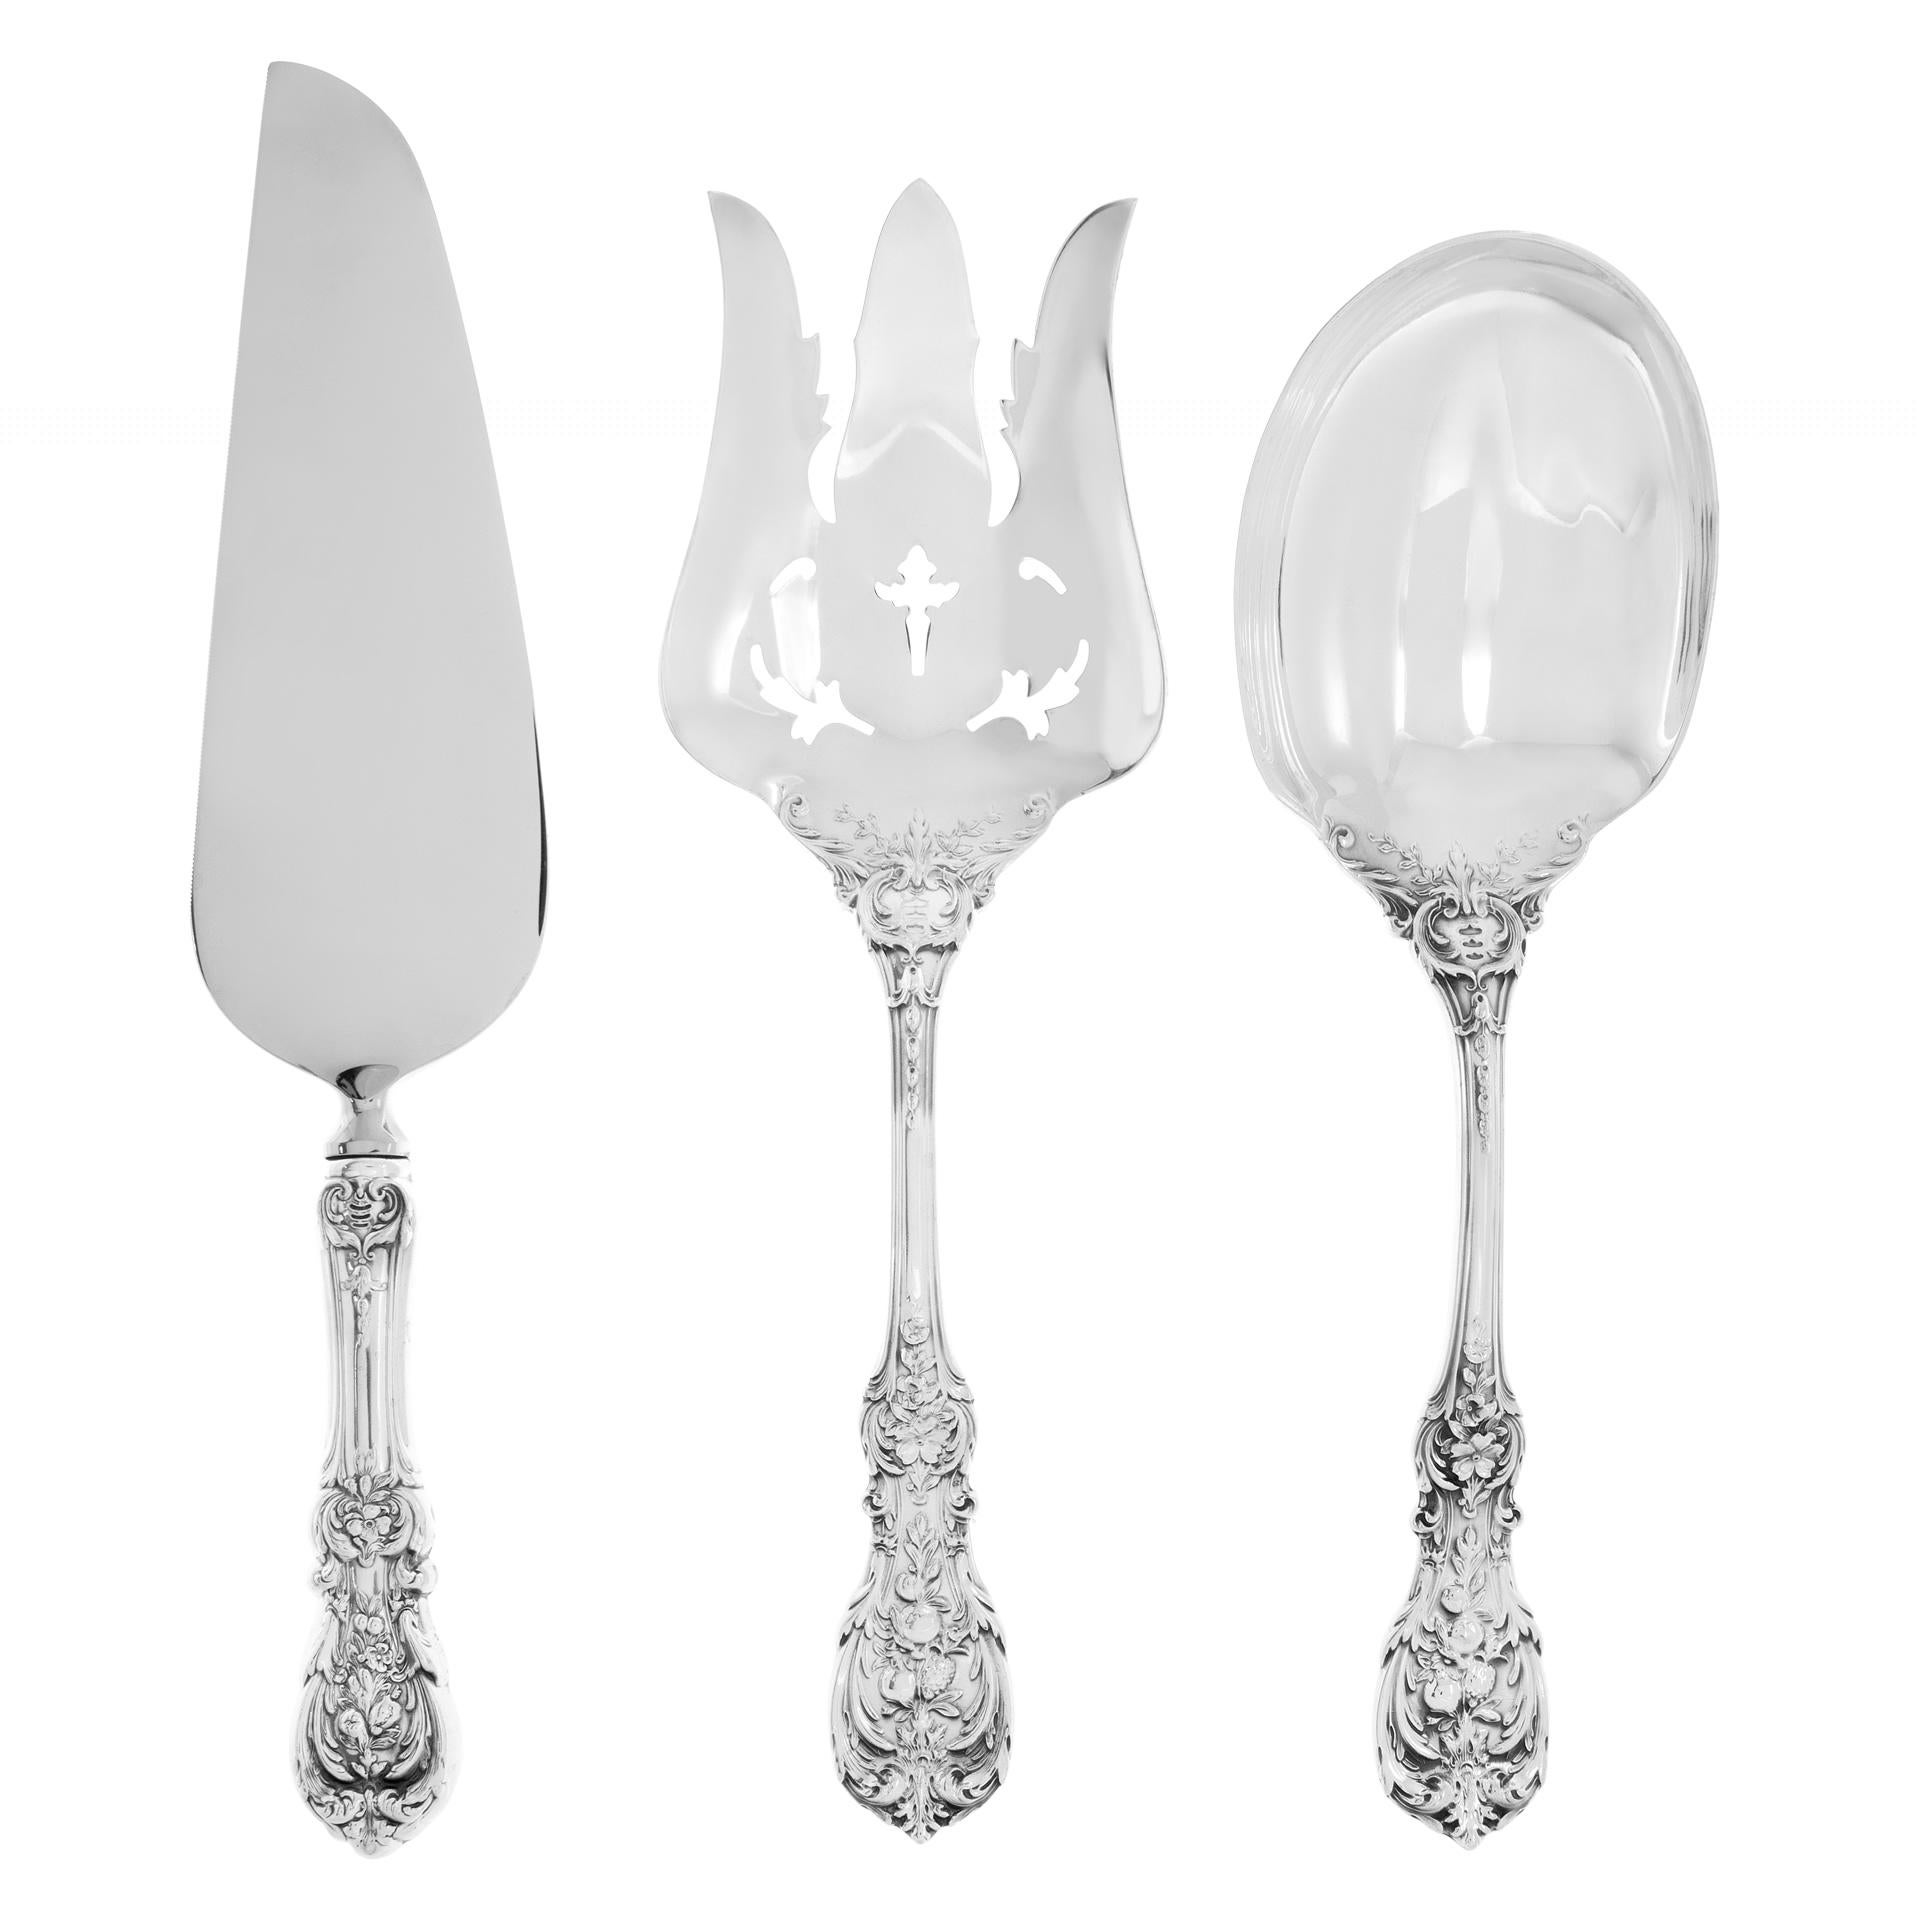 FRANCIS THE FIRST sterling silver flatware set patented in 1907 by Reed & Barton. 57 pieces- 4 place set for 7 (with xtras)+ 6 serving pieces. Over 77 troy ounces of .925 sterling silver (counting stainless steel blade pieces as 1.00 troy ounce